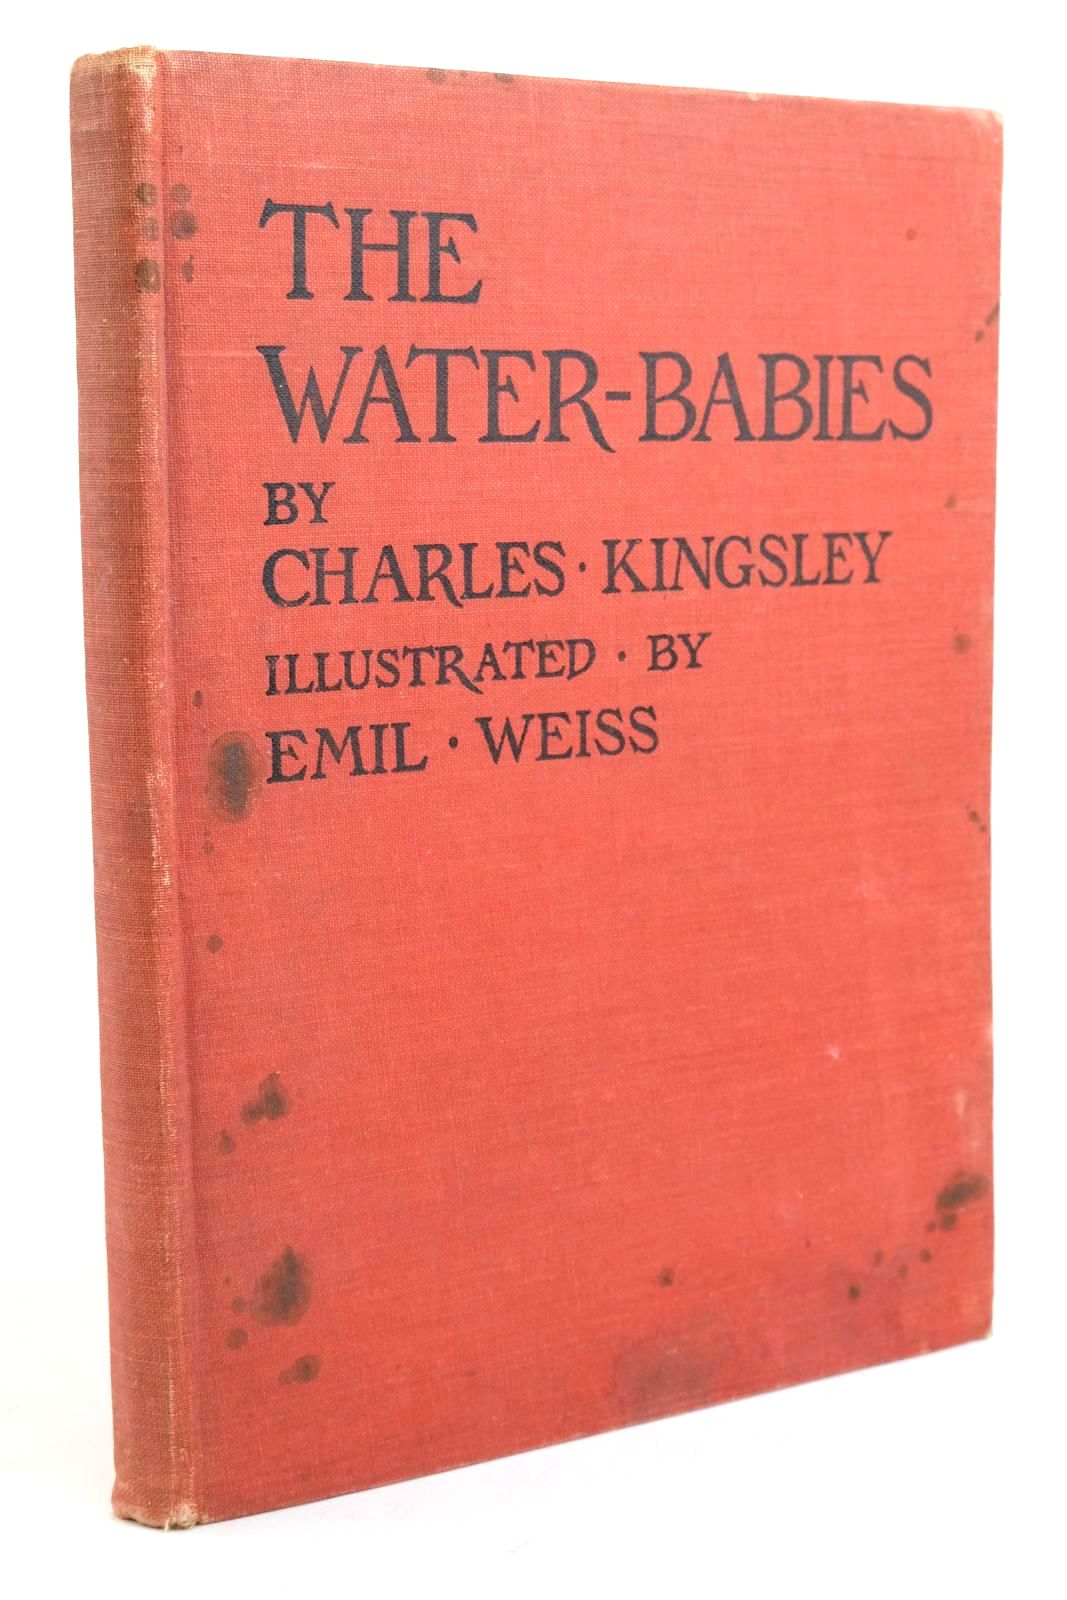 Photo of THE WATER BABIES written by Kingsley, Charles illustrated by Weiss, Emil published by P.R. Gawthorn Ltd. (STOCK CODE: 1322148)  for sale by Stella & Rose's Books